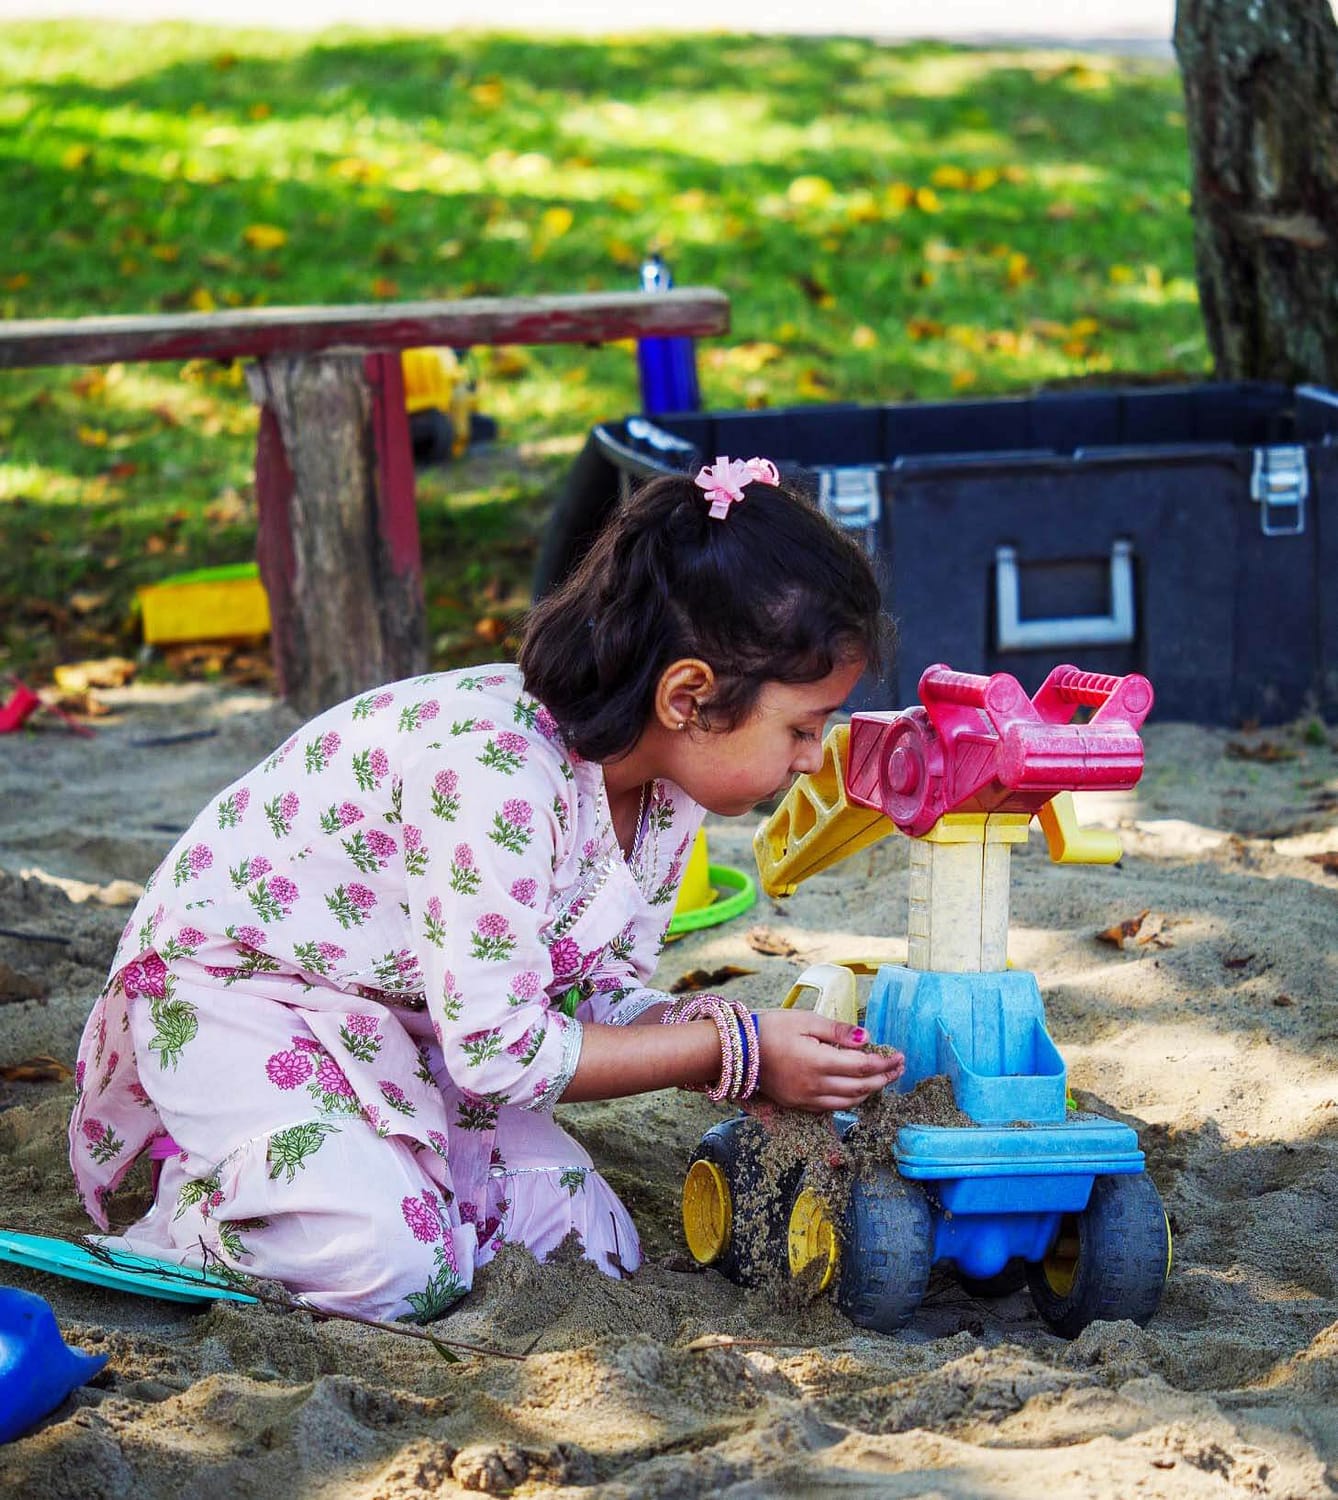 Child Playing with Toys in the Park